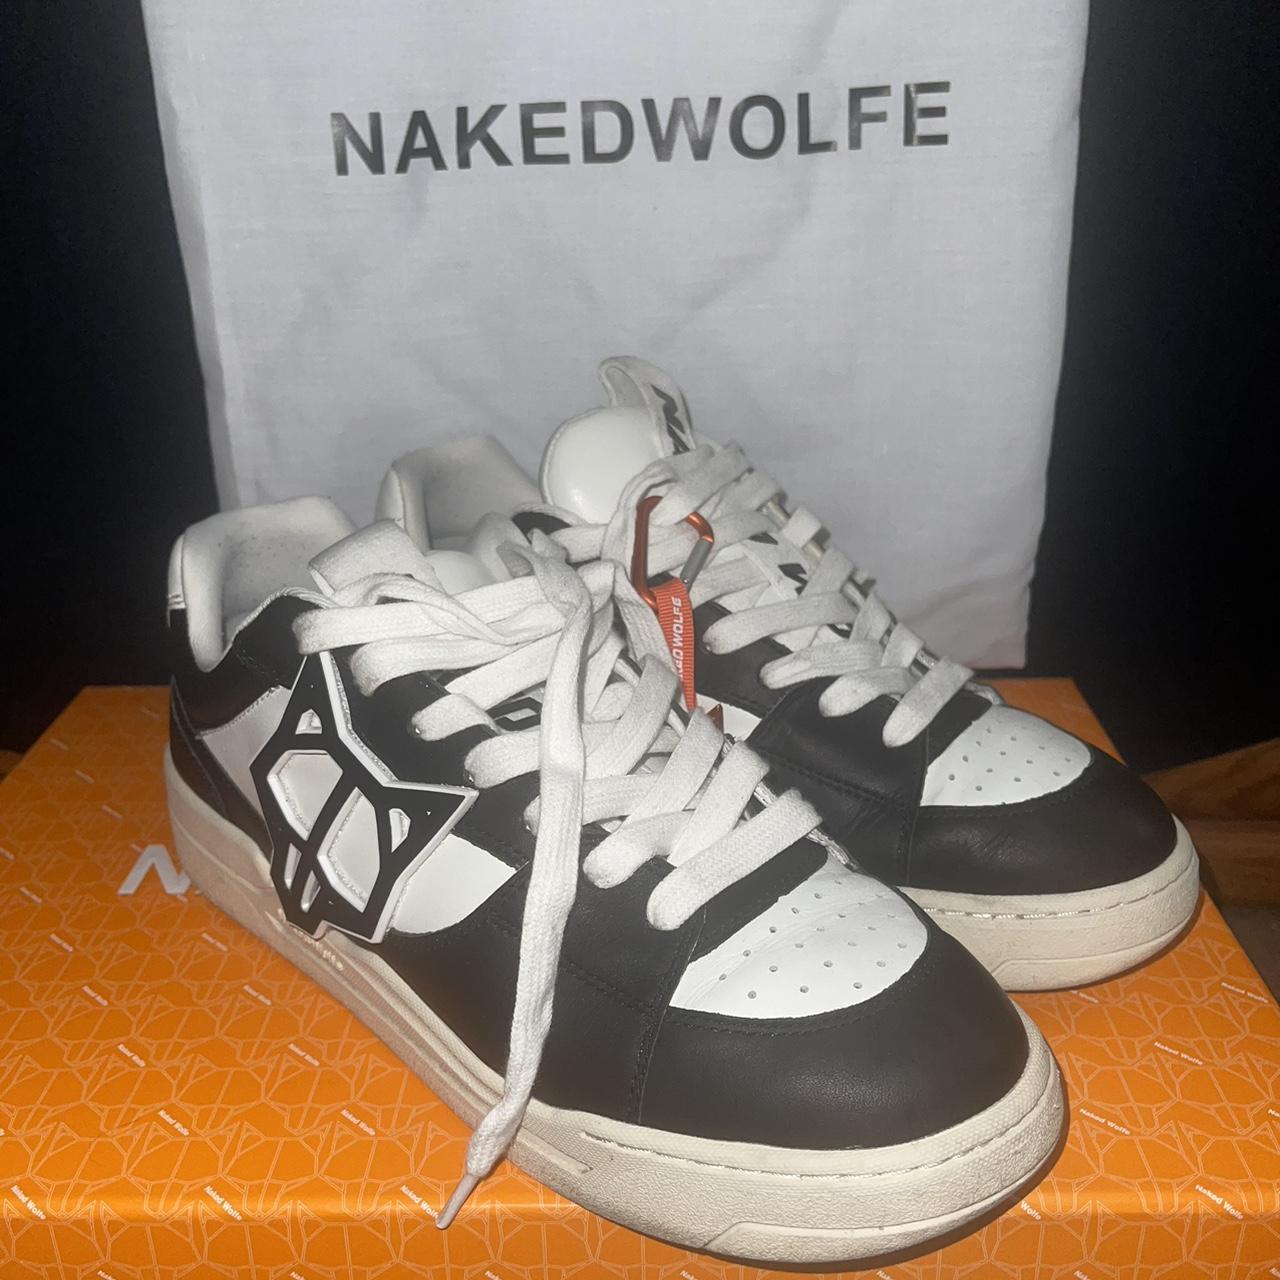 Naked Wolfe sneakers. Didn’t really wear that much... - Depop